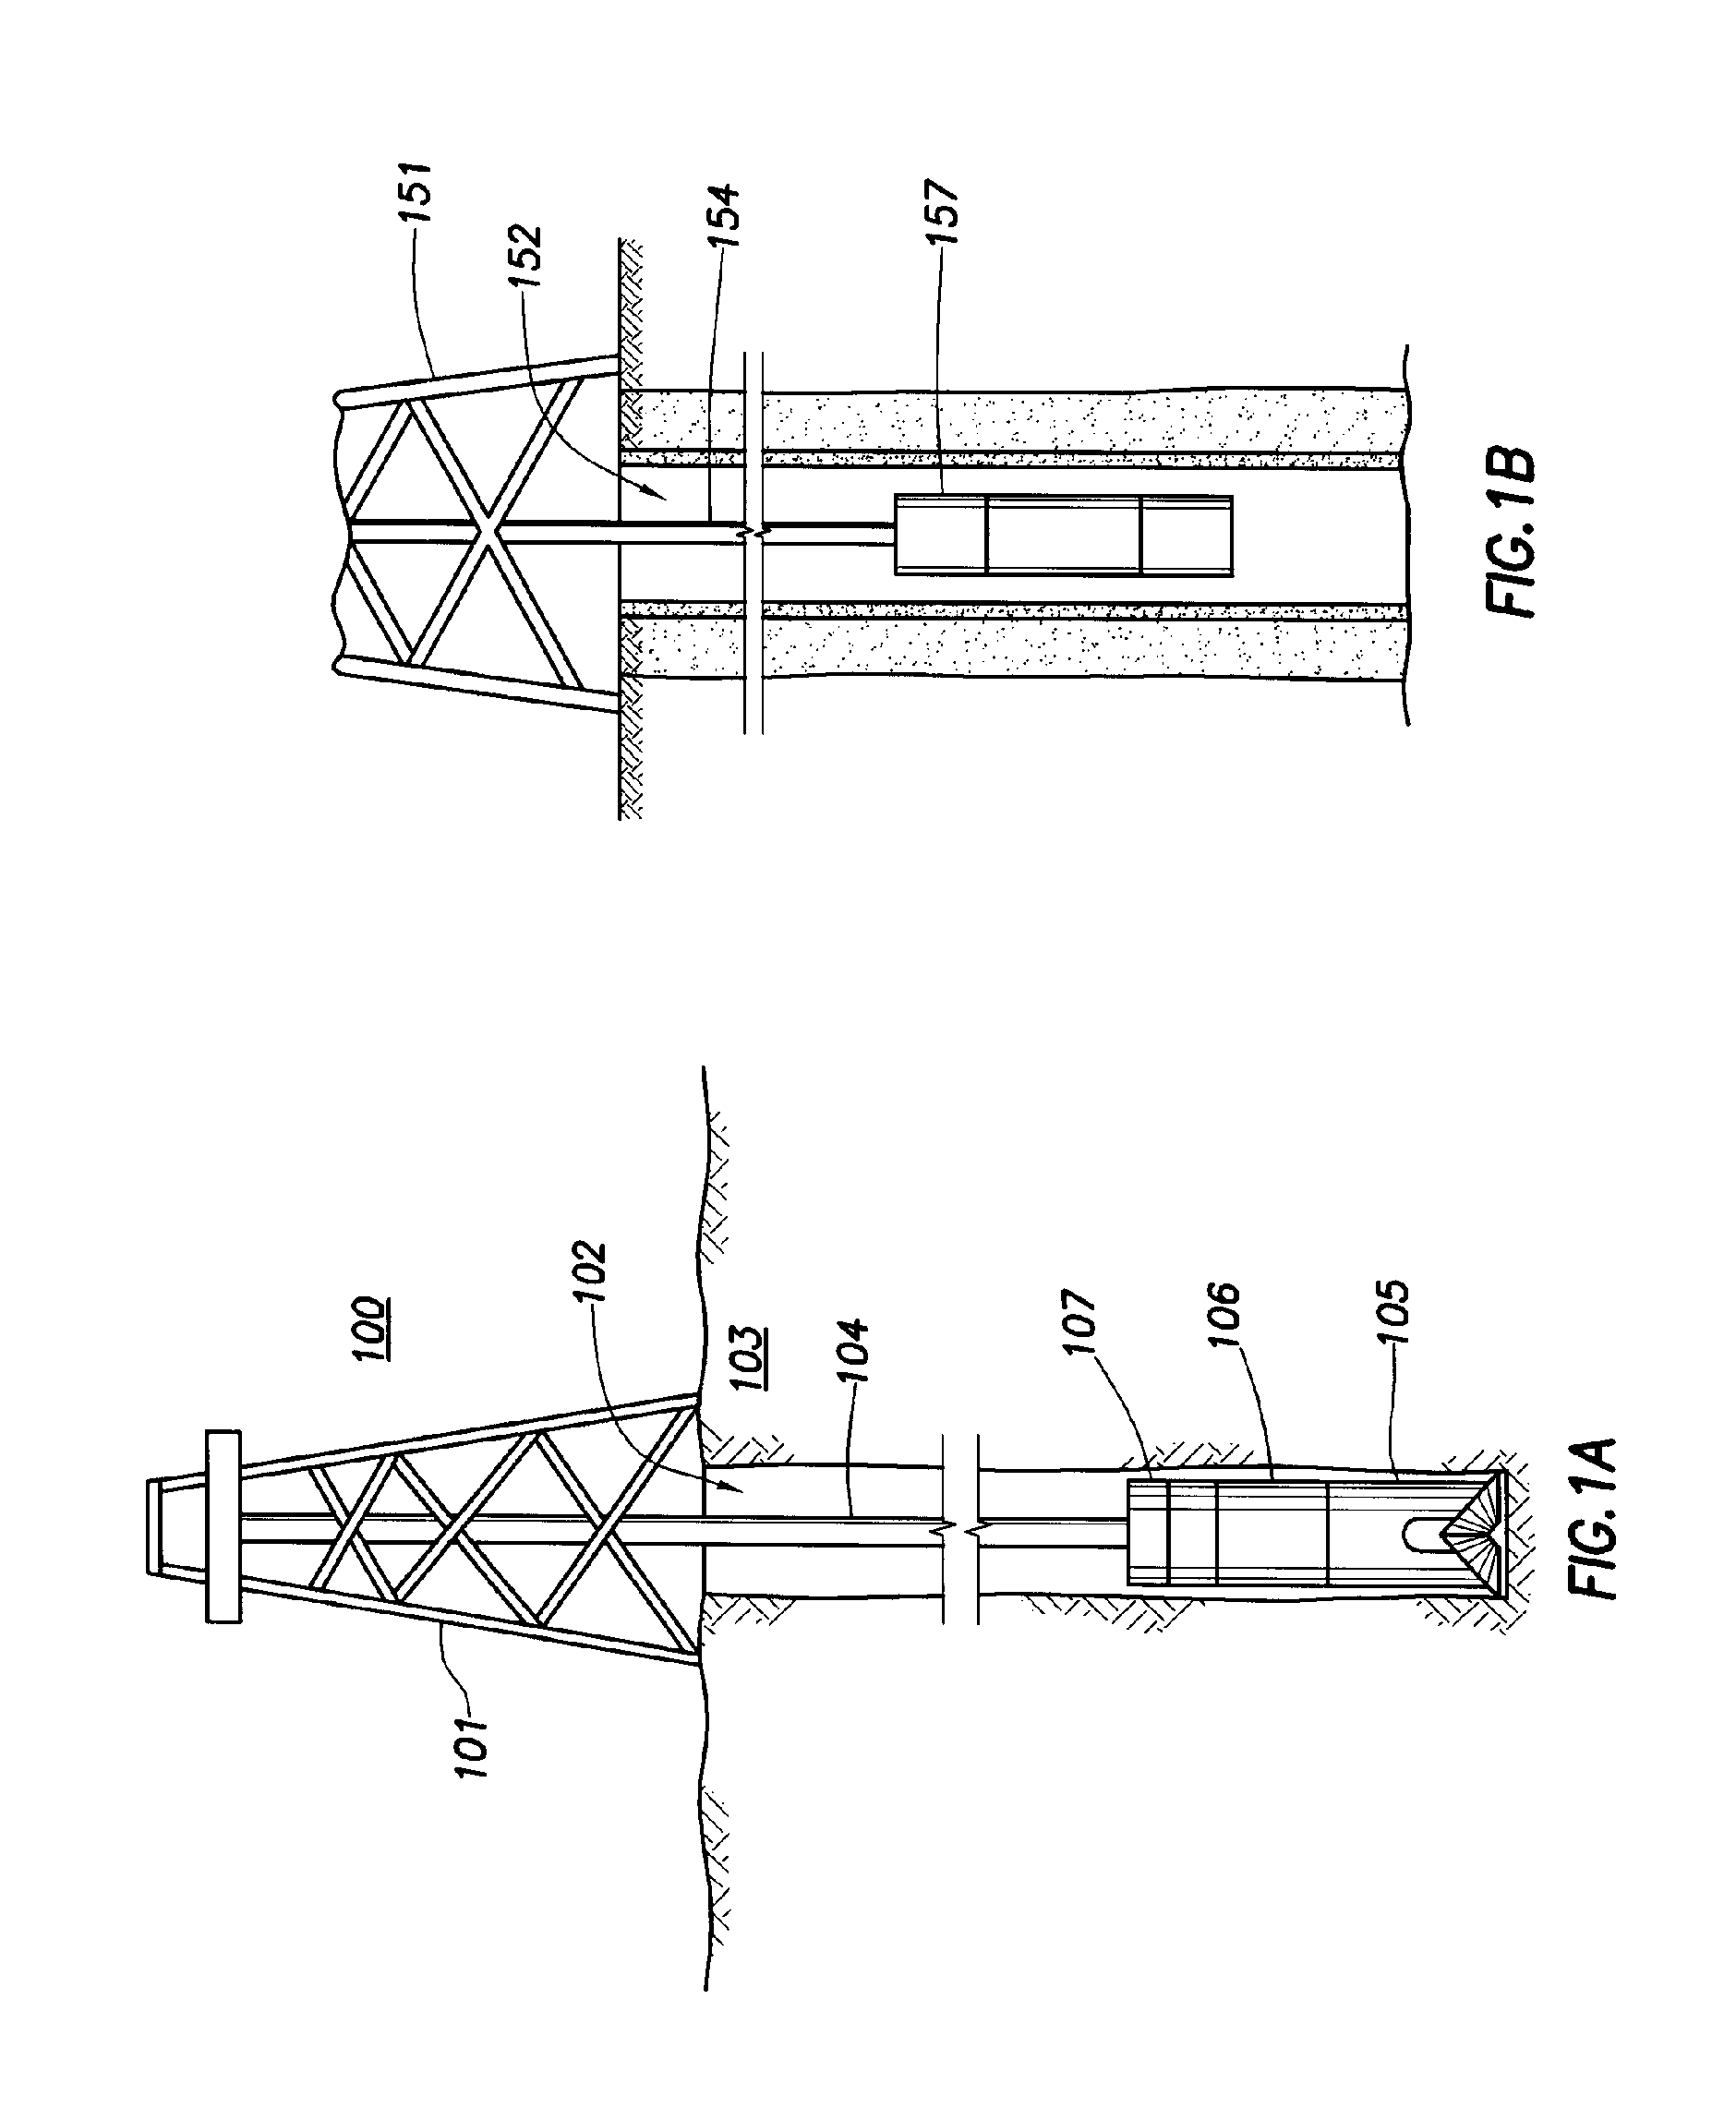 Battery switch for downhole tools